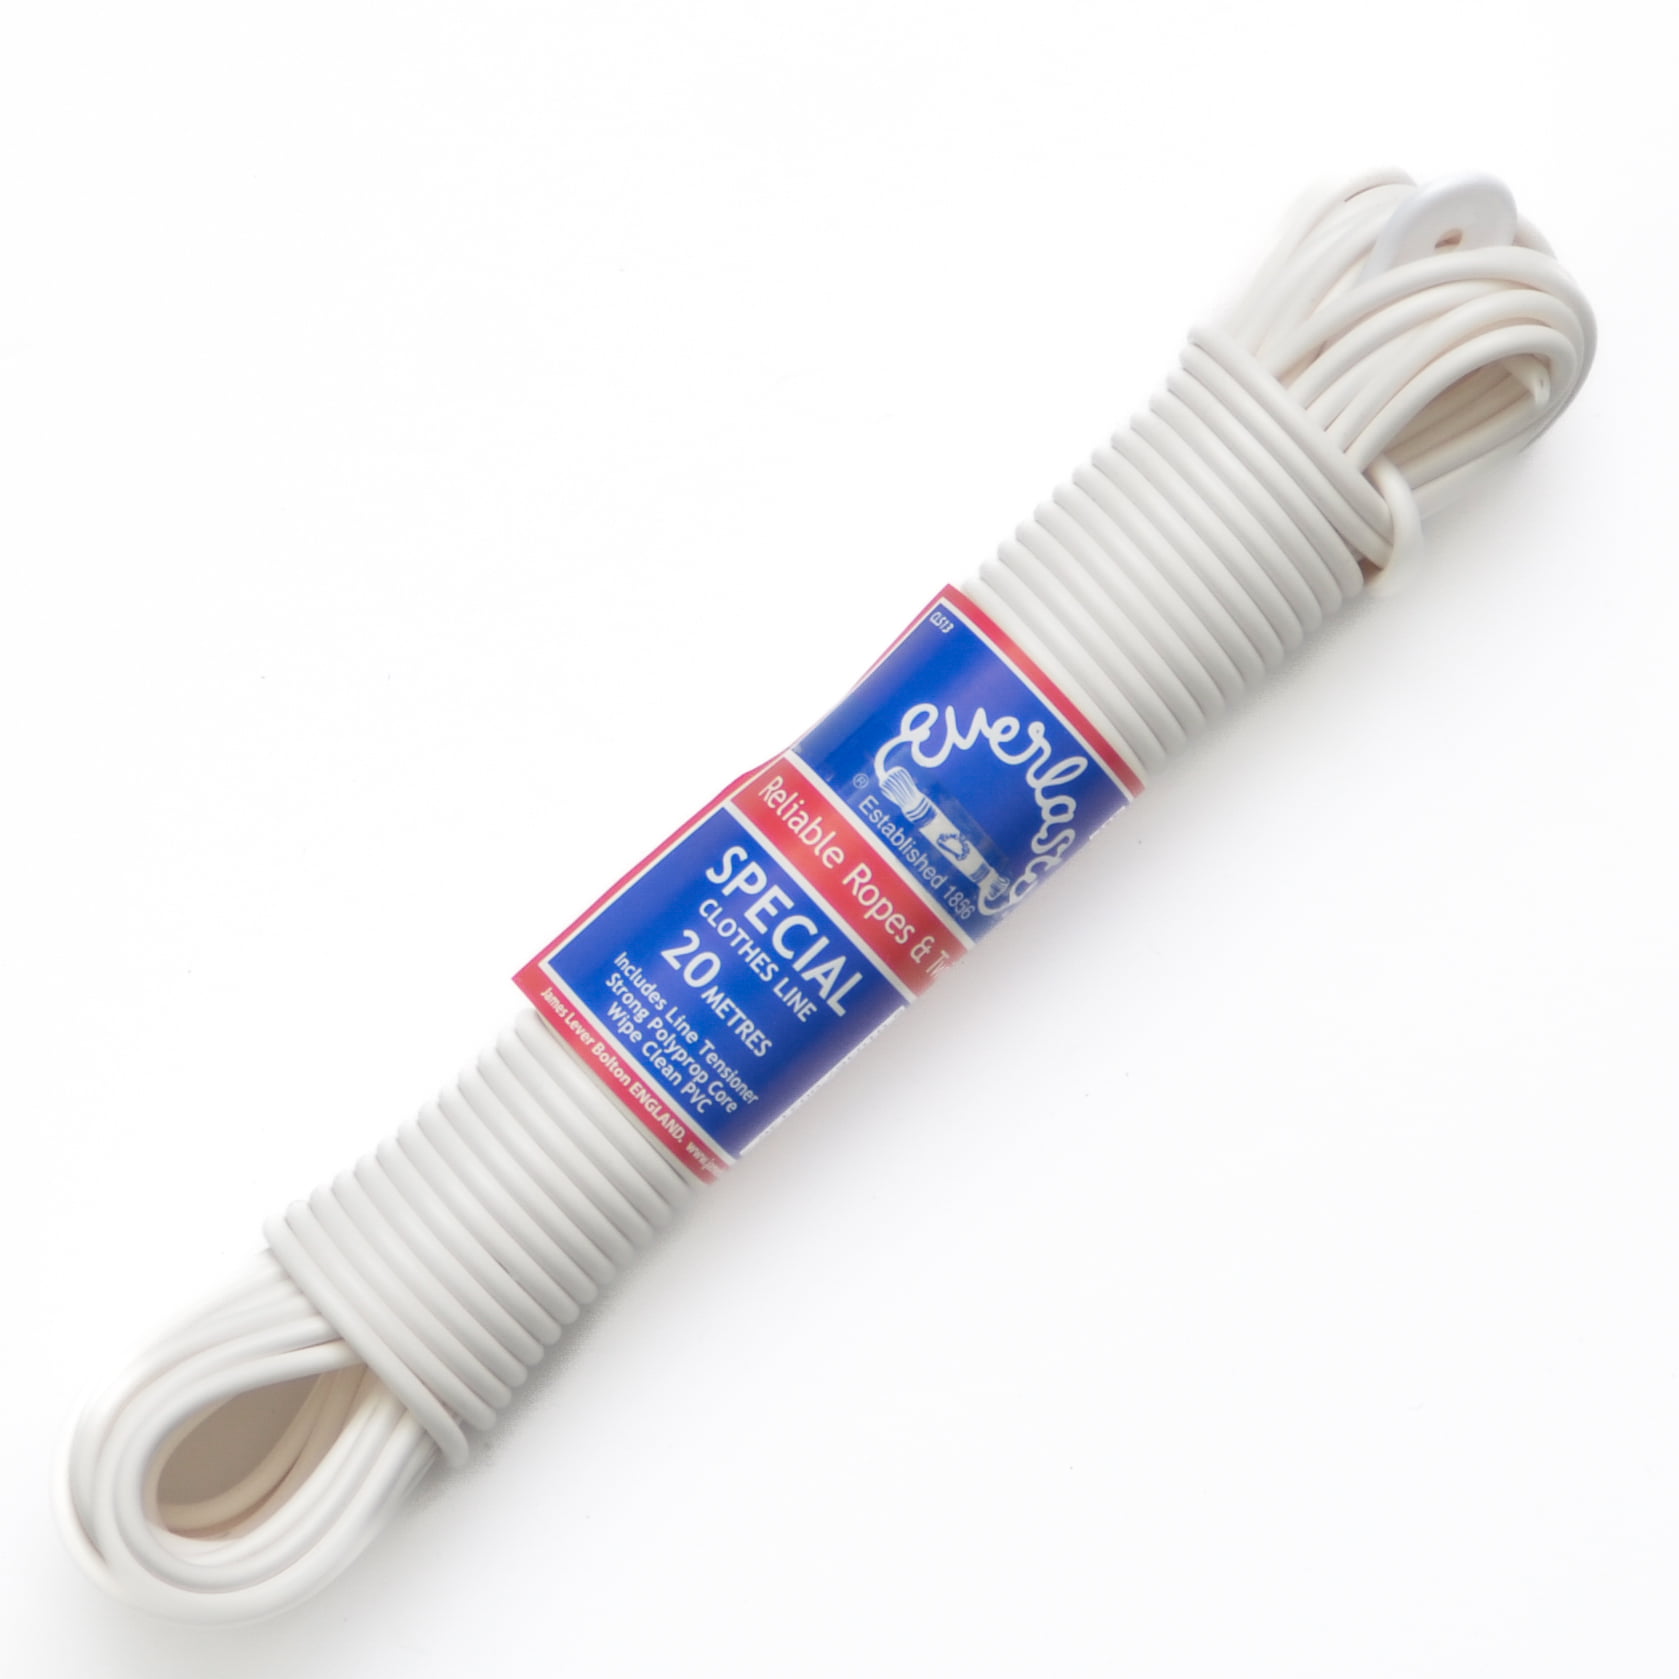 https://rope-source.co.uk/wp-content/uploads/2019/10/special-plastic-clothes-line.jpg